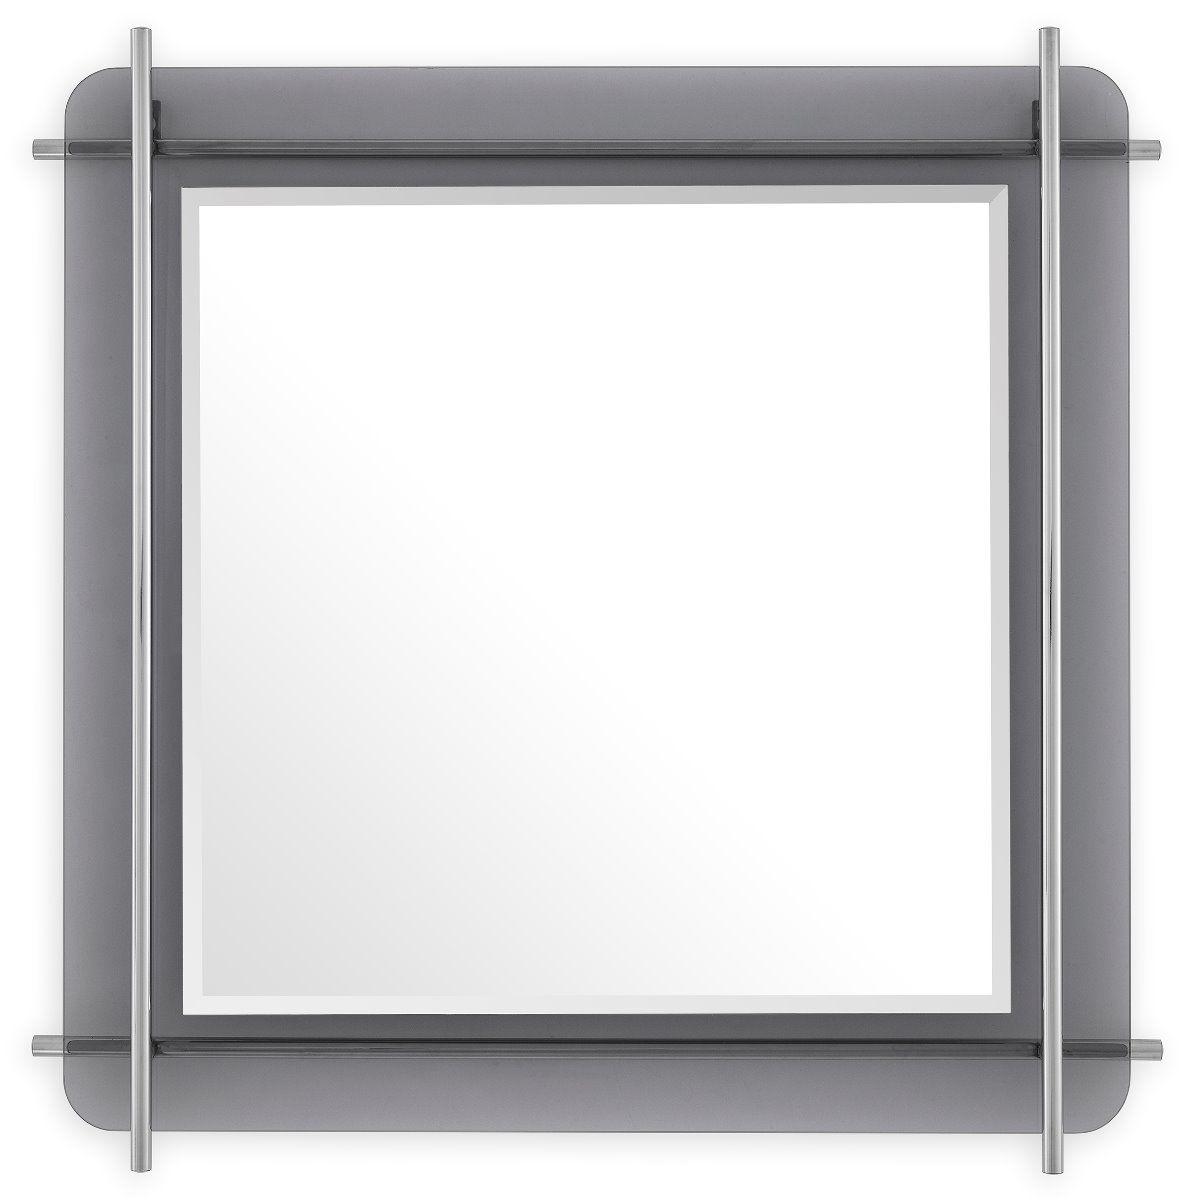 polished stainless steel | smoke glass | bevelled mirror glass